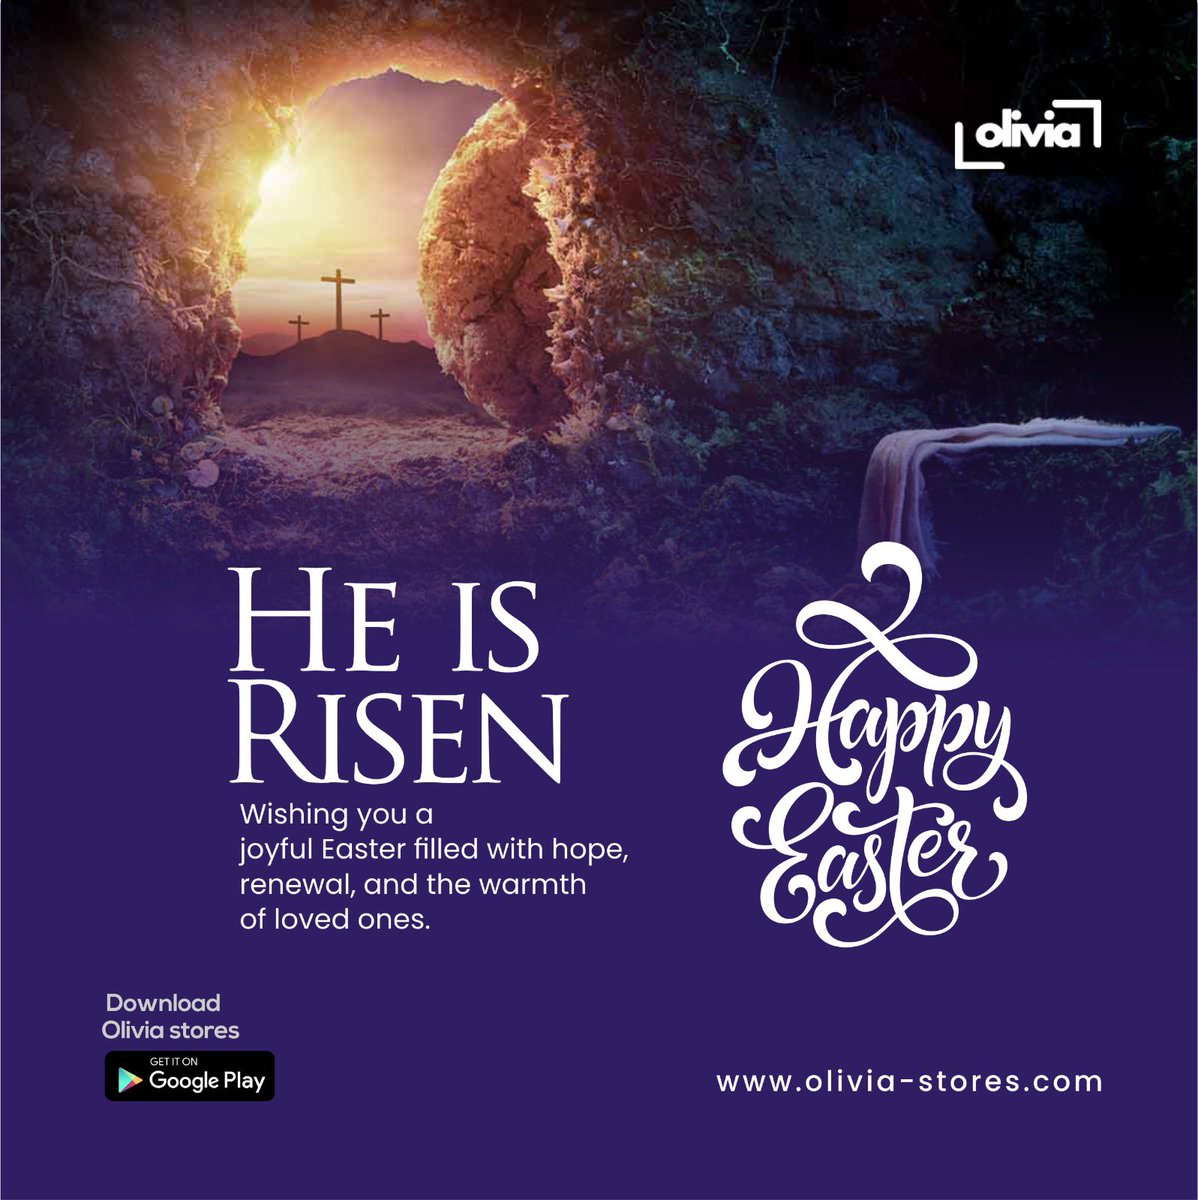 Happy Easter to everyone celebrating 🙌 

May this period bring renewed joy and hope to you and your loved ones 🎊🎊

#Olivia #SimplifyingBusinesses #Manage #Monitor #ExpandwithOlivia #PersonalizedWebsite #SendMoney #ReceiveMoney #POS #oliviameansbusiness